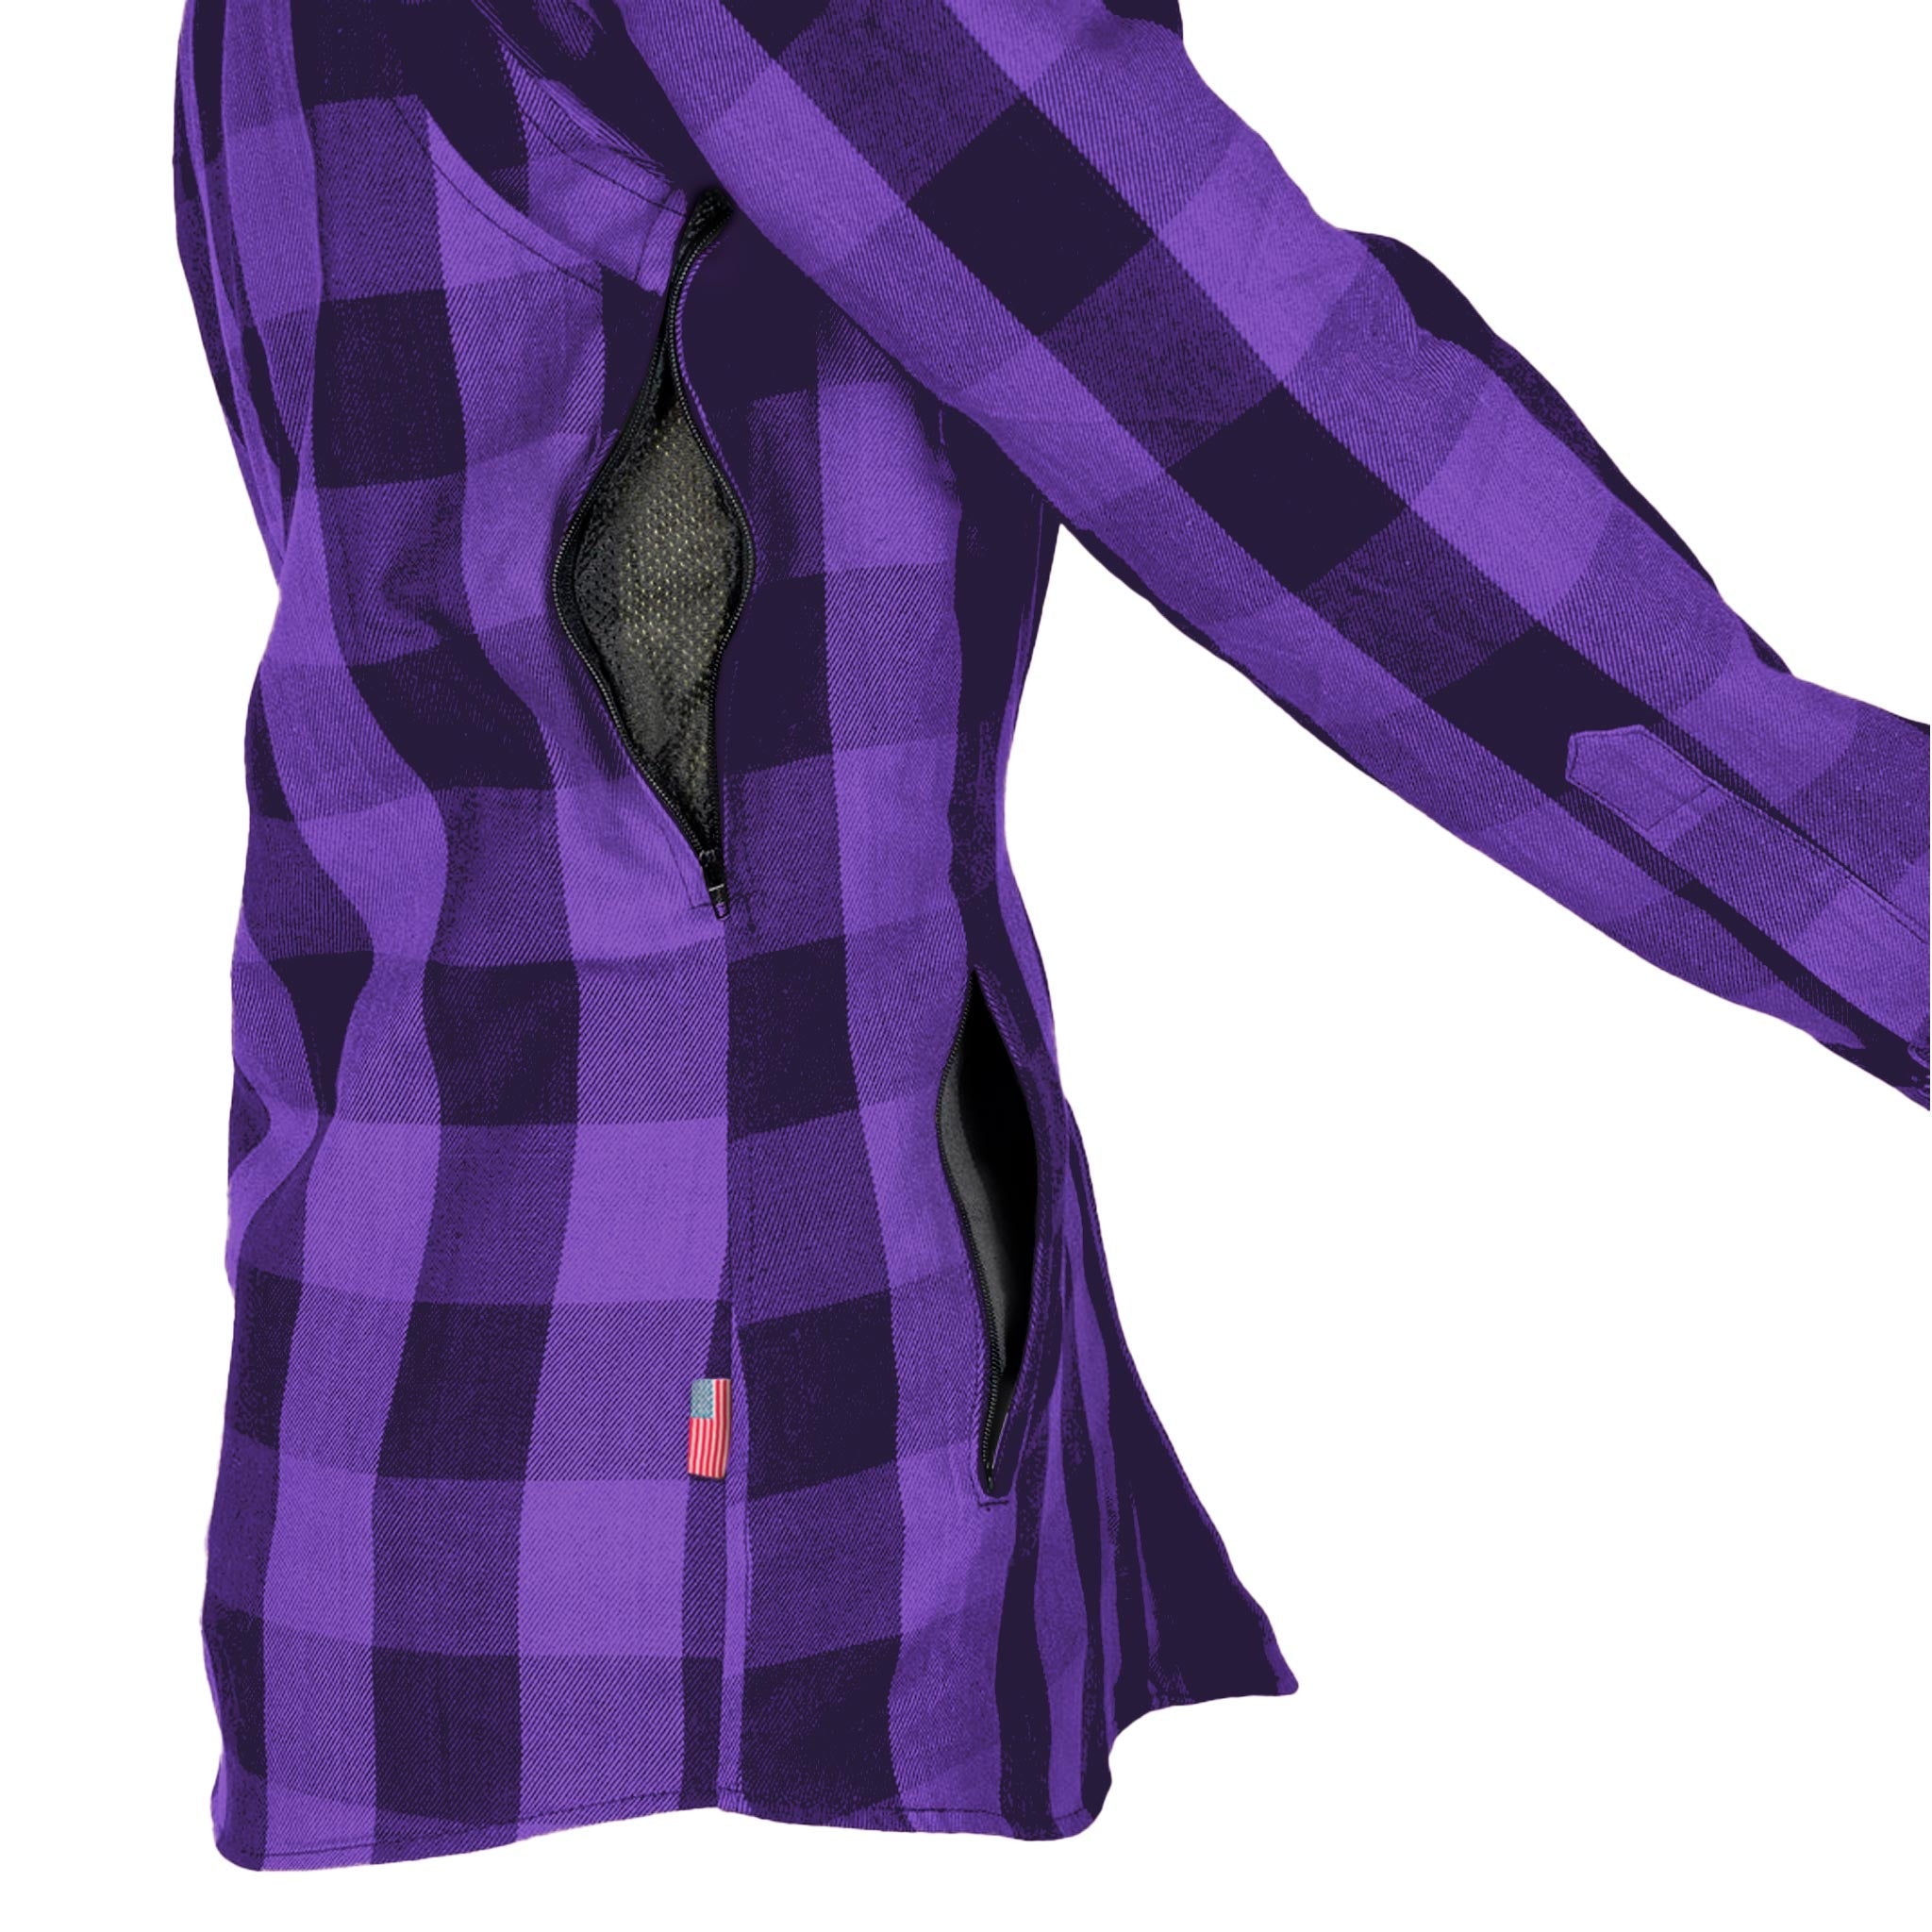 Protective Flannel Shirt for Women - Purple Checkered with Pads